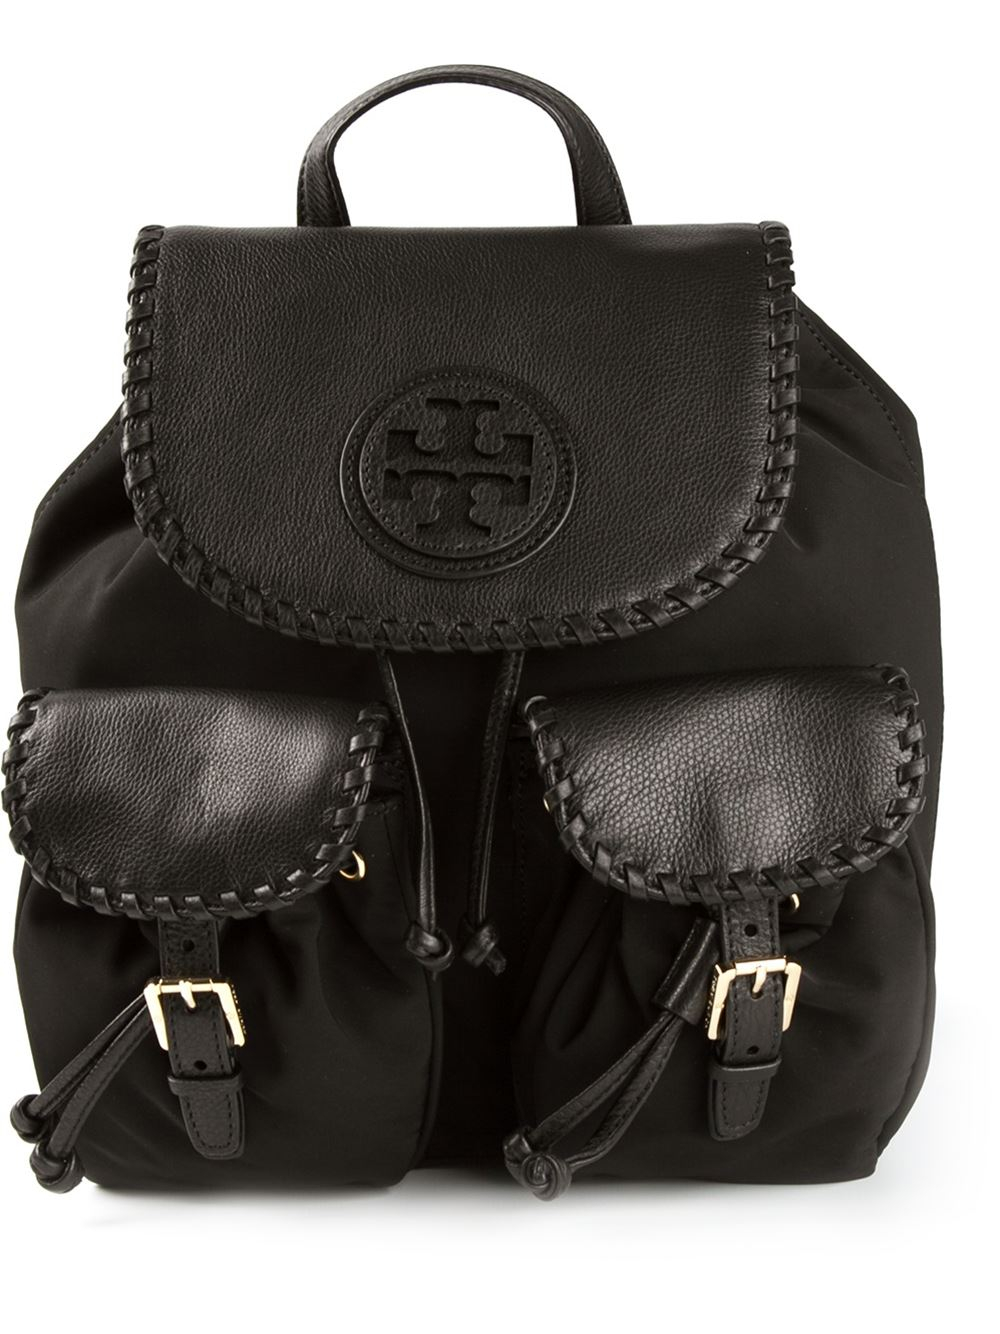 Tory Burch Marion Backpack in Black - Lyst